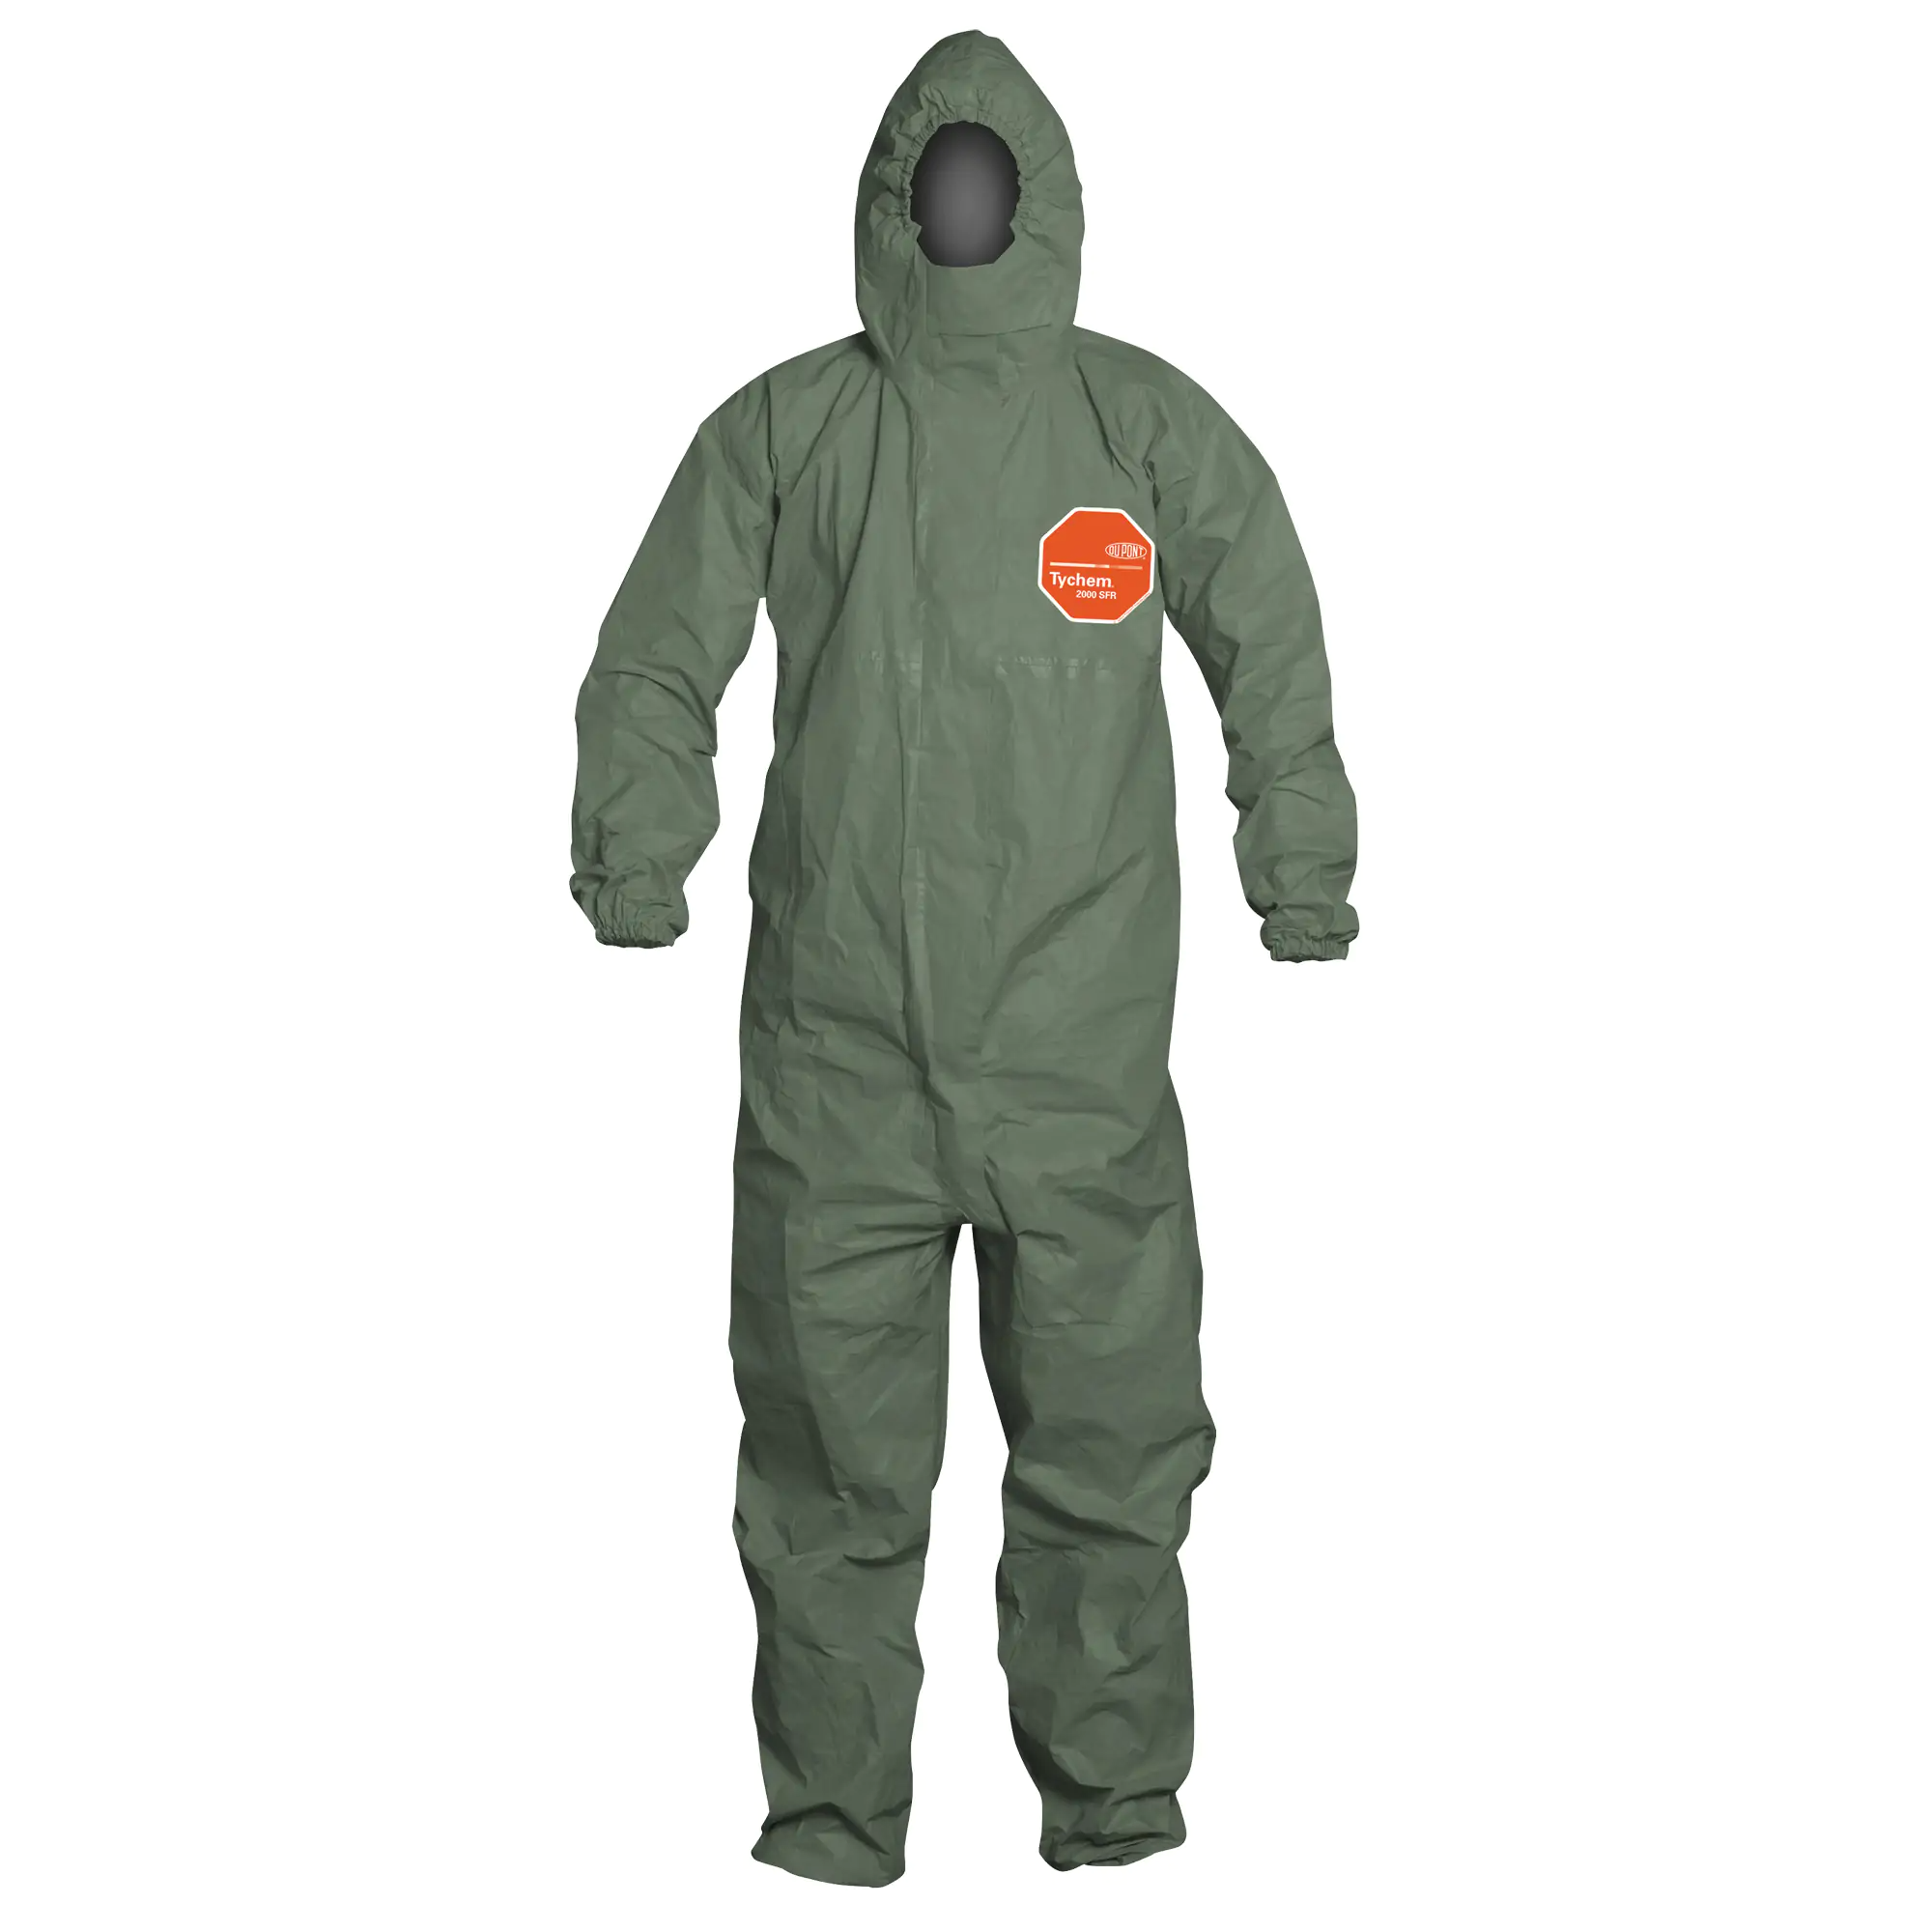 Tychem® 2000 SFR Protective Coveralls, Green, Large